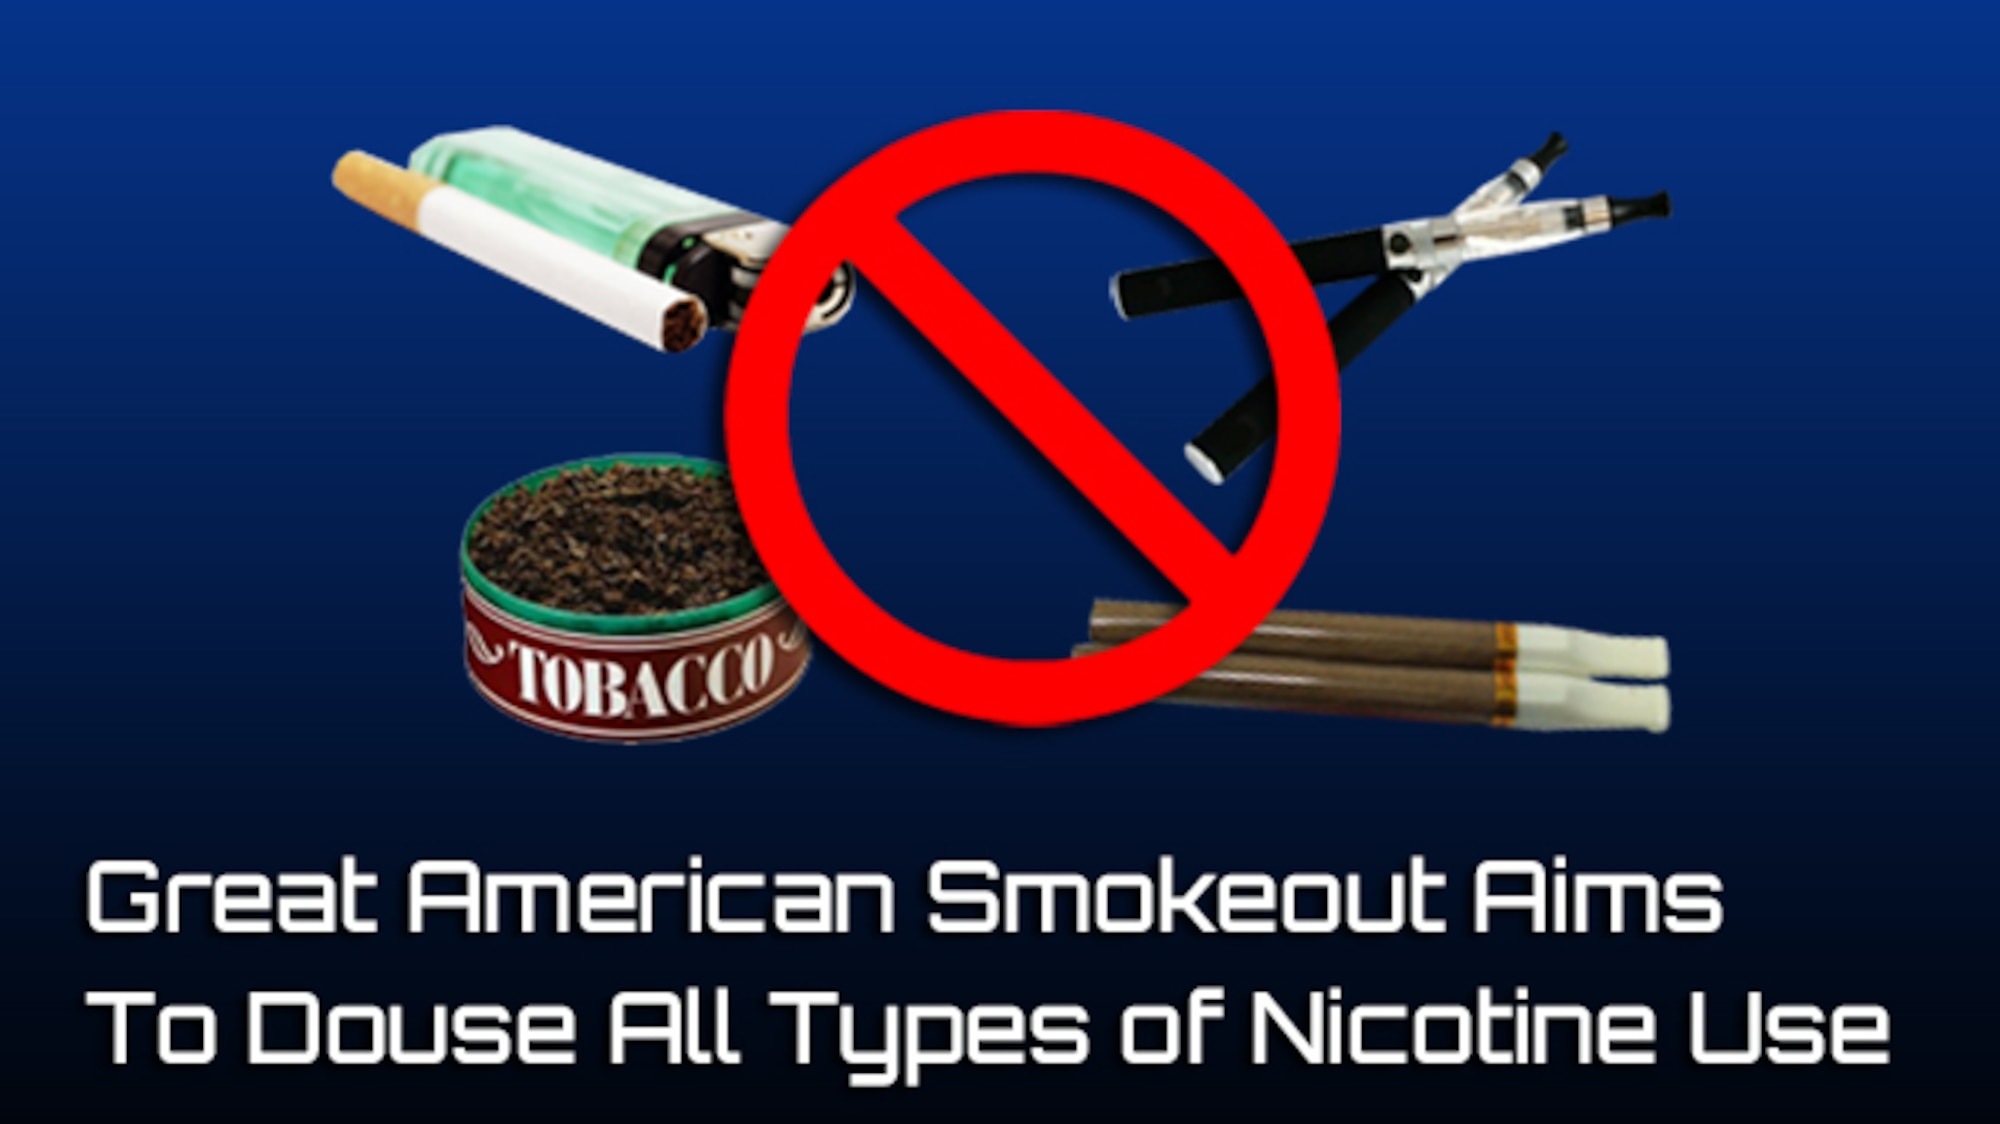 Great American Smokeout Aims To Douse All Types Of Nicotine Use Air Force Medical Service